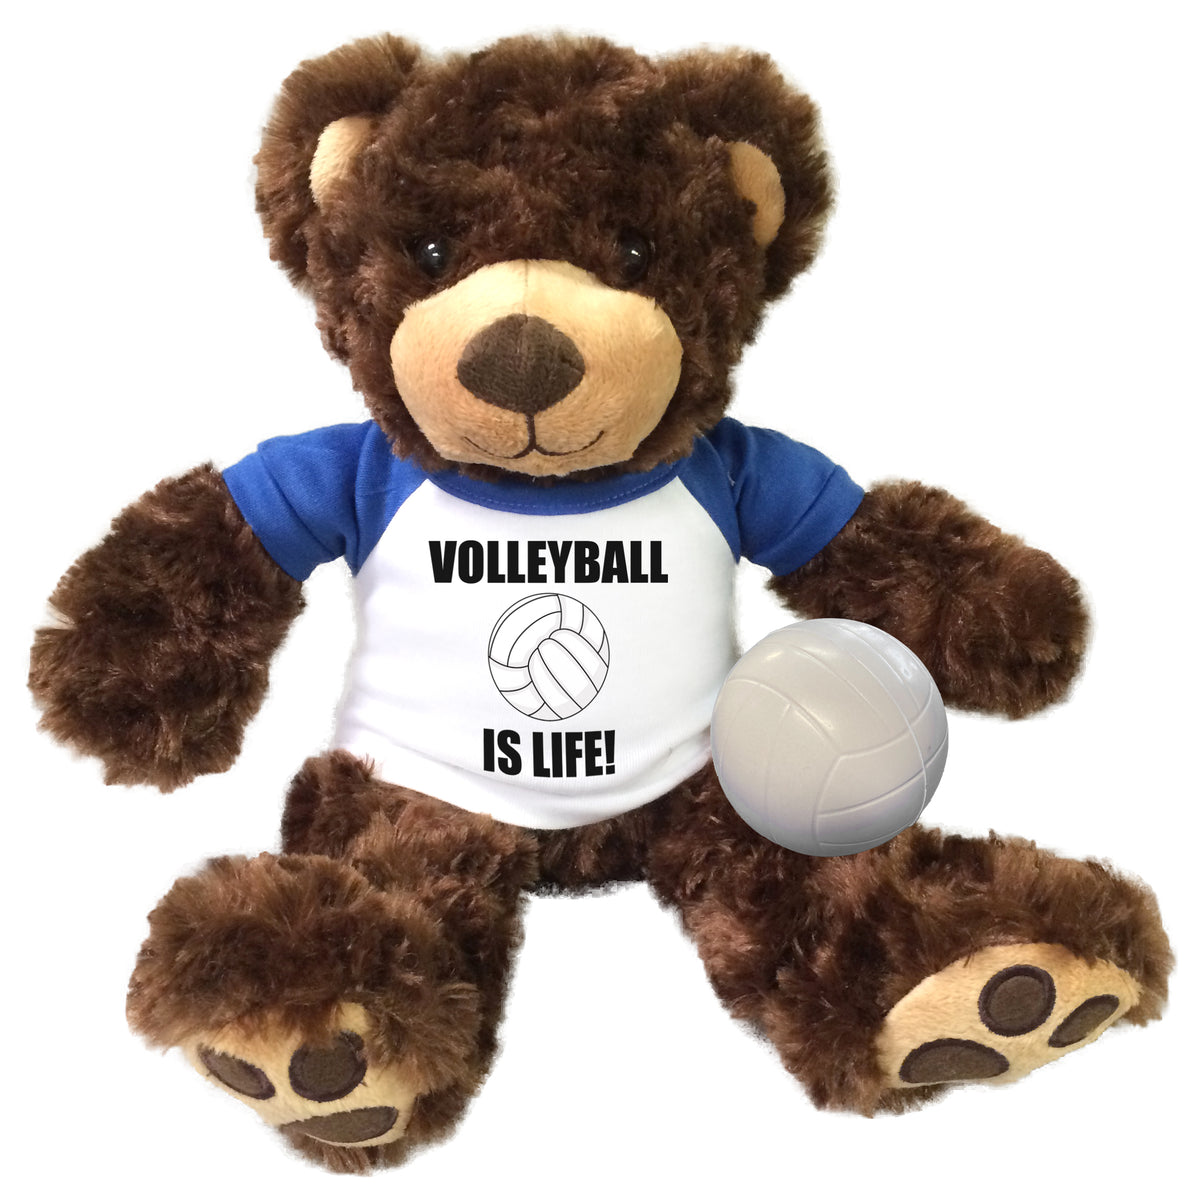 Volleyball Teddy Bear - Personalized 13" Brown Vera Bear